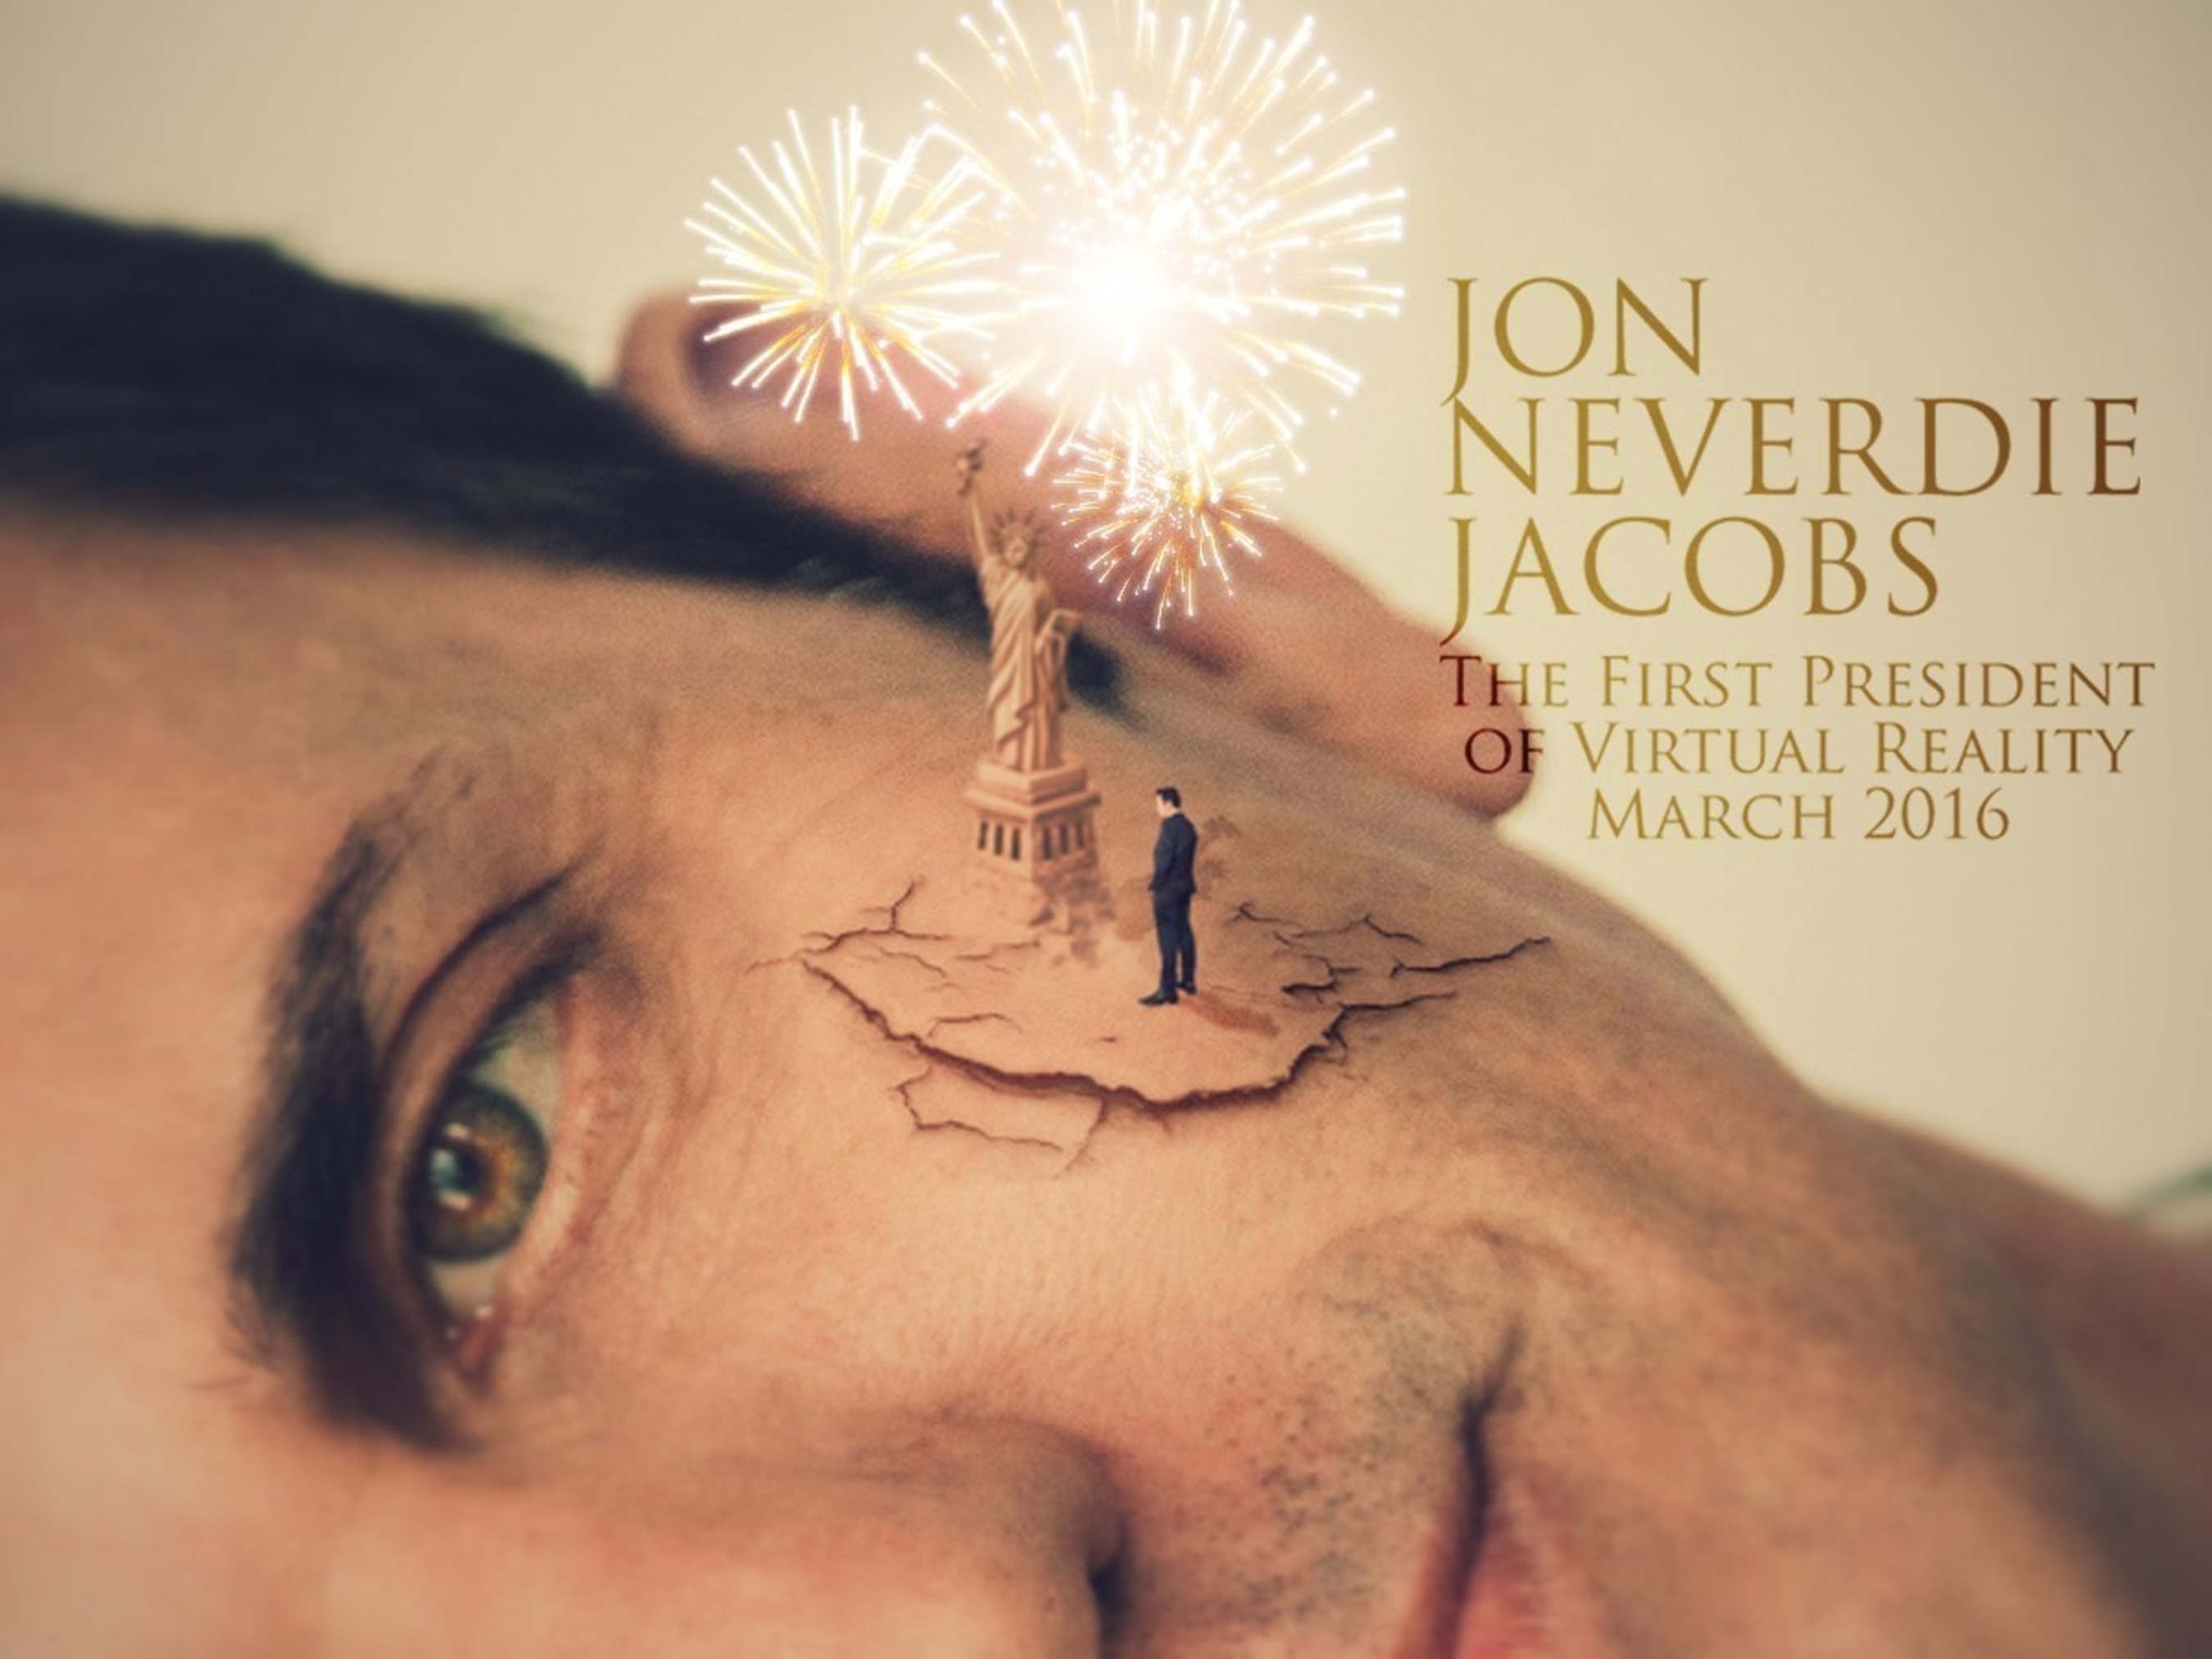 Jon NEVERDIE Jacobs: The First President of Virtual Reality March 2016